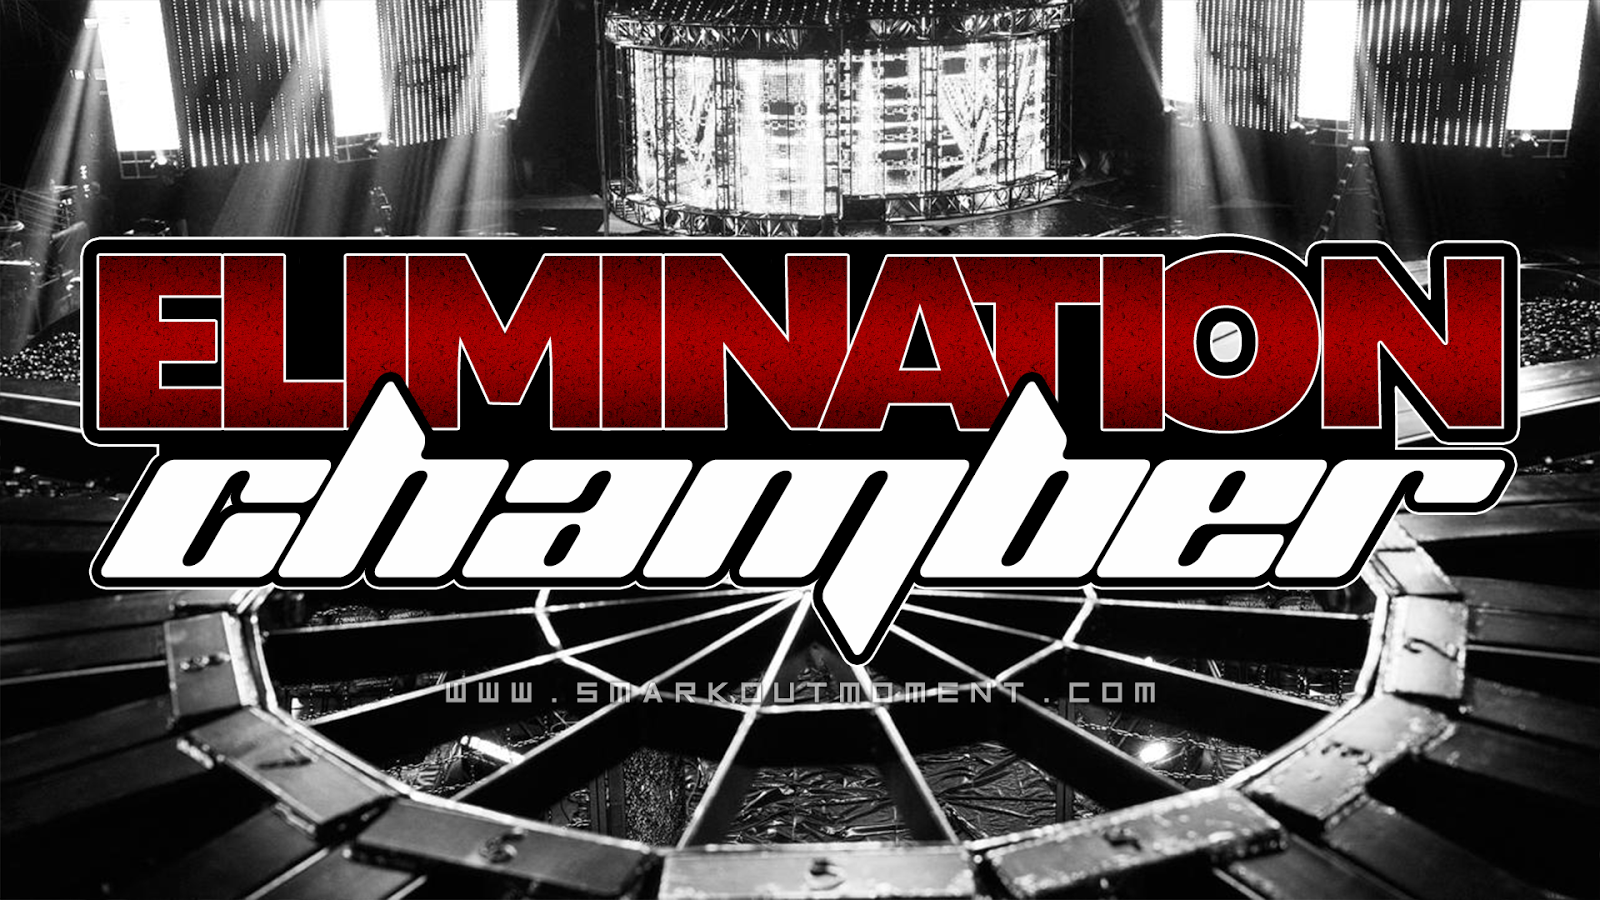 WWE Elimination Chamber PPV Wallpaper Posters and Logo Backgrounds | Smark  Out Moment